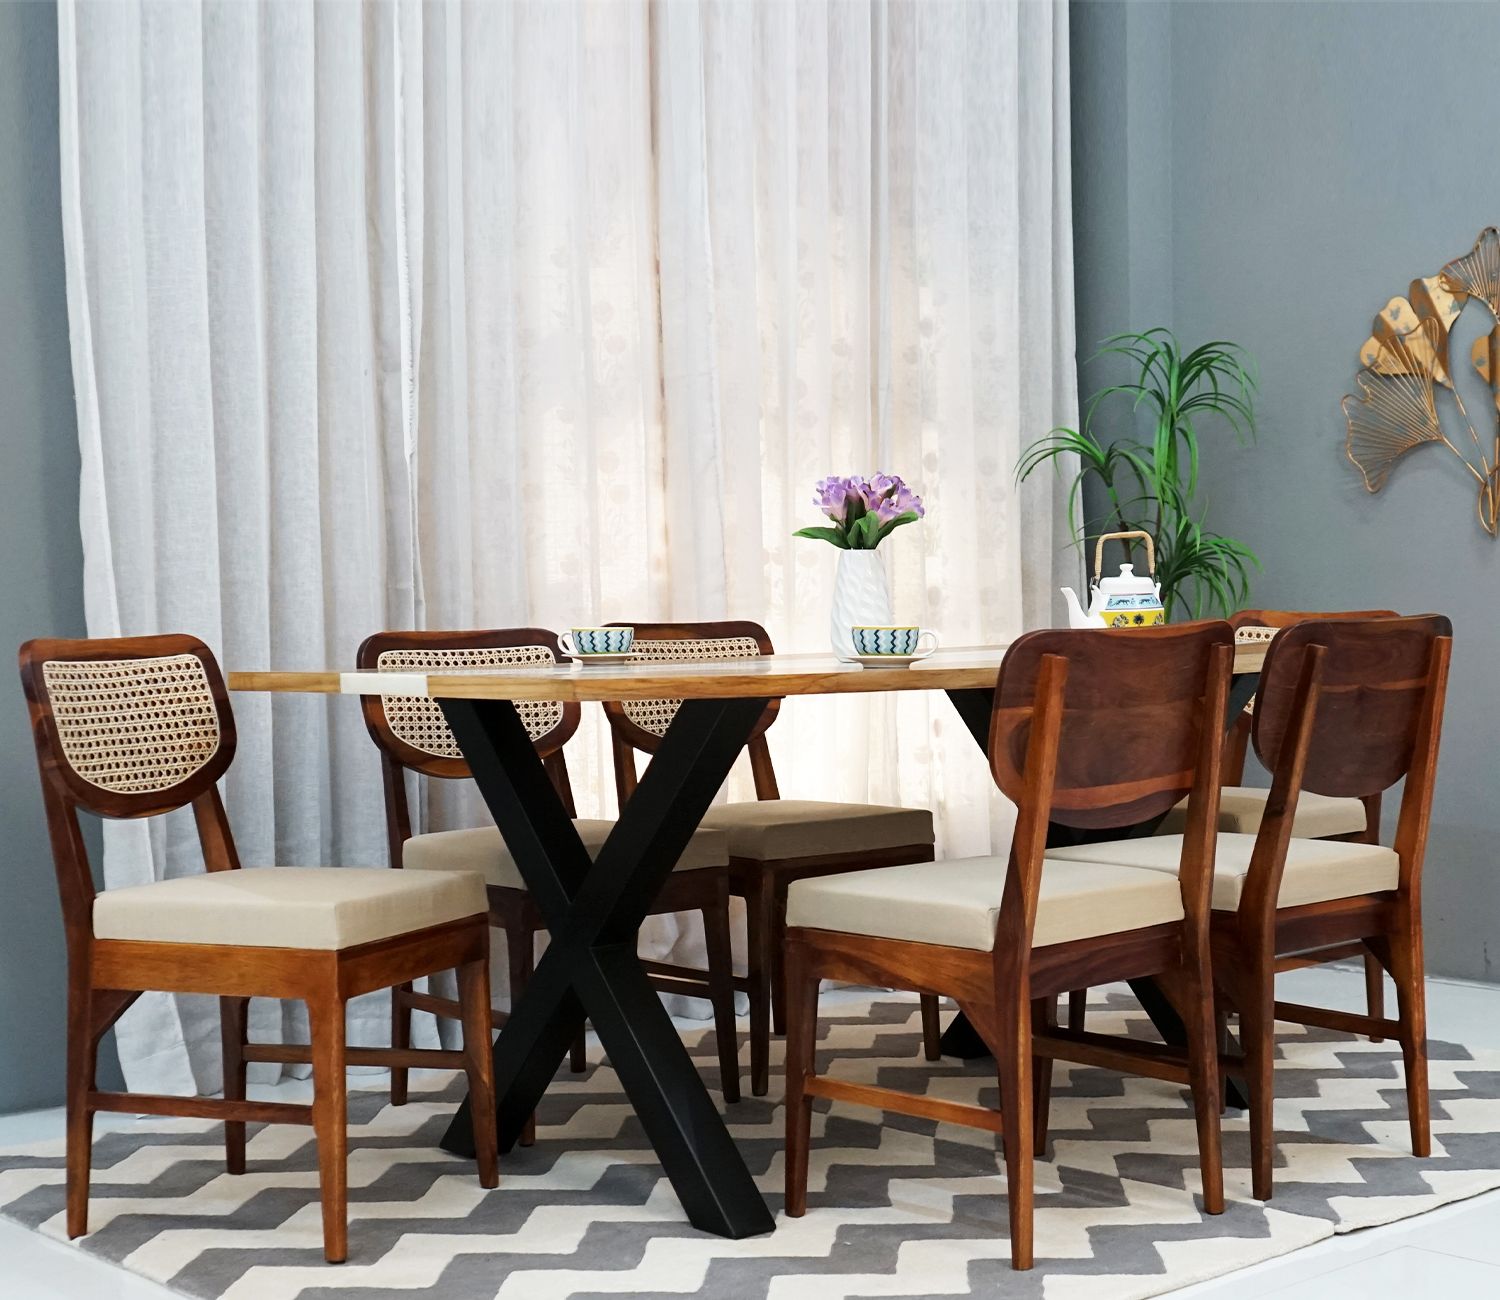 Is a 6 Seater Dining Table Right for You? Here's How to Decide!